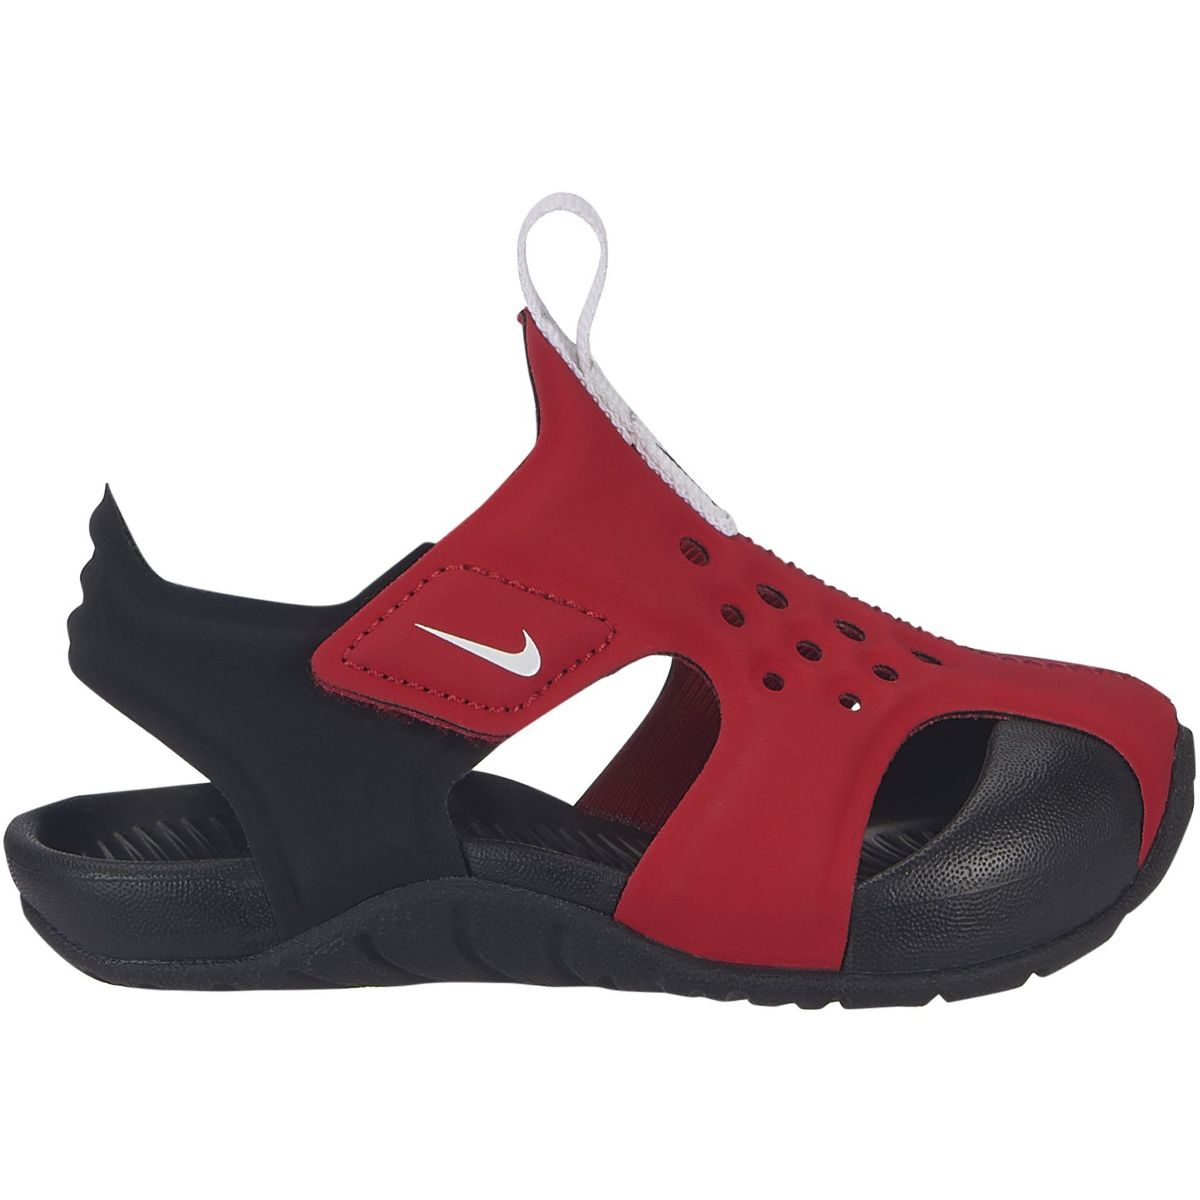 Nike Sunray Protect 2 Boy's Toddler Sandals (TD) 943827-601